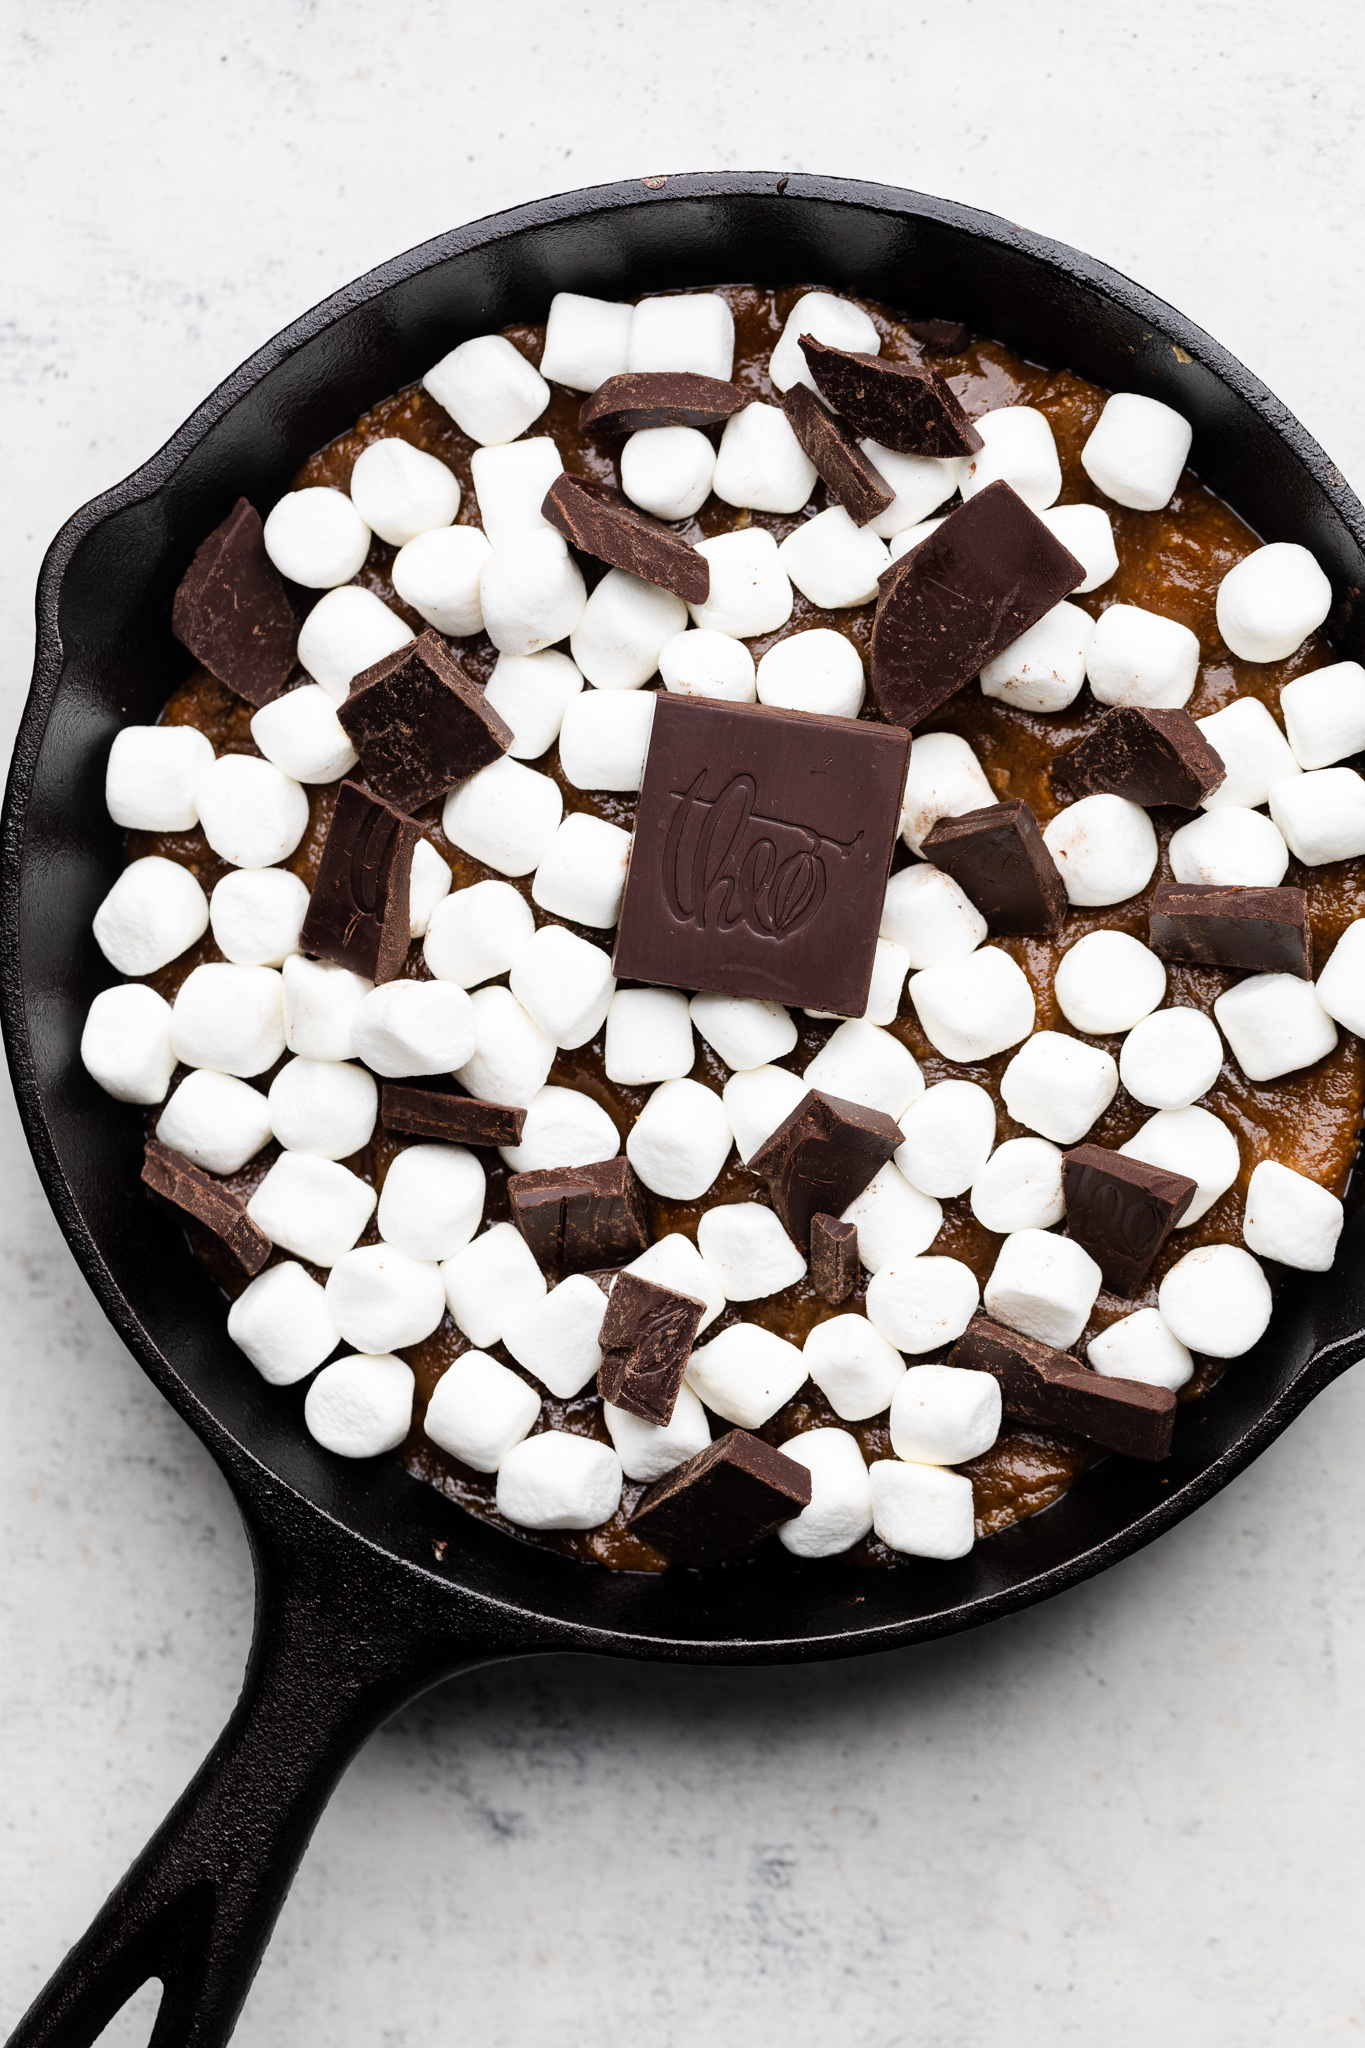 https://themindfulhapa.com/wp-content/uploads/2021/09/pb-smores-cookie-skillet-9-1.jpg